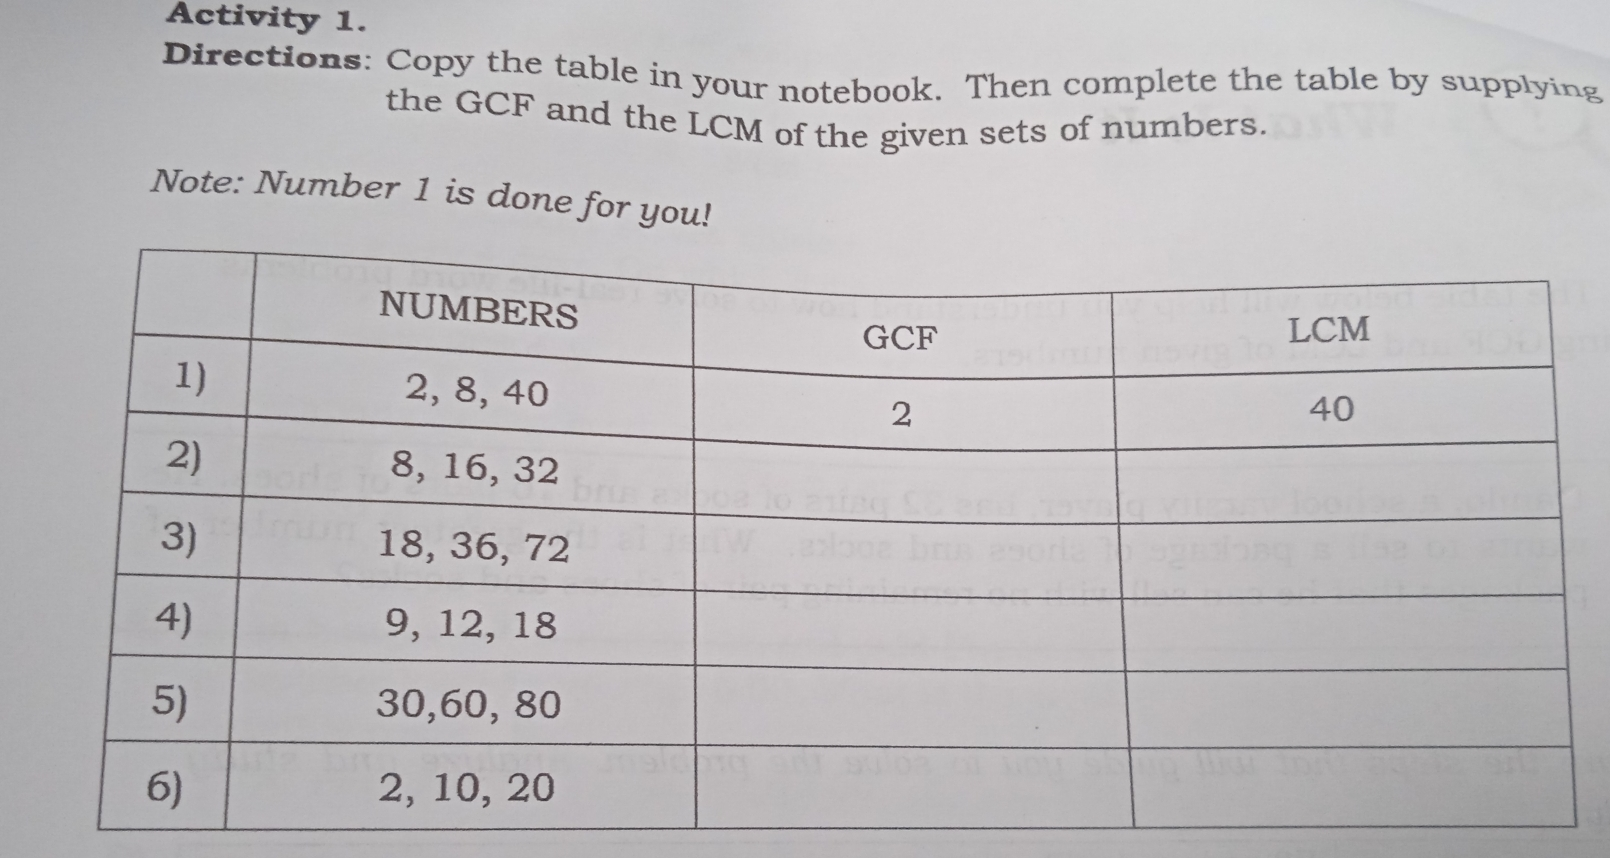 Activity 1. Directions: Copy the table in your notebook. Then complete the table by supplying the GCF and the LCM of the given sets of numbers. Note: Number 1 is done for you!